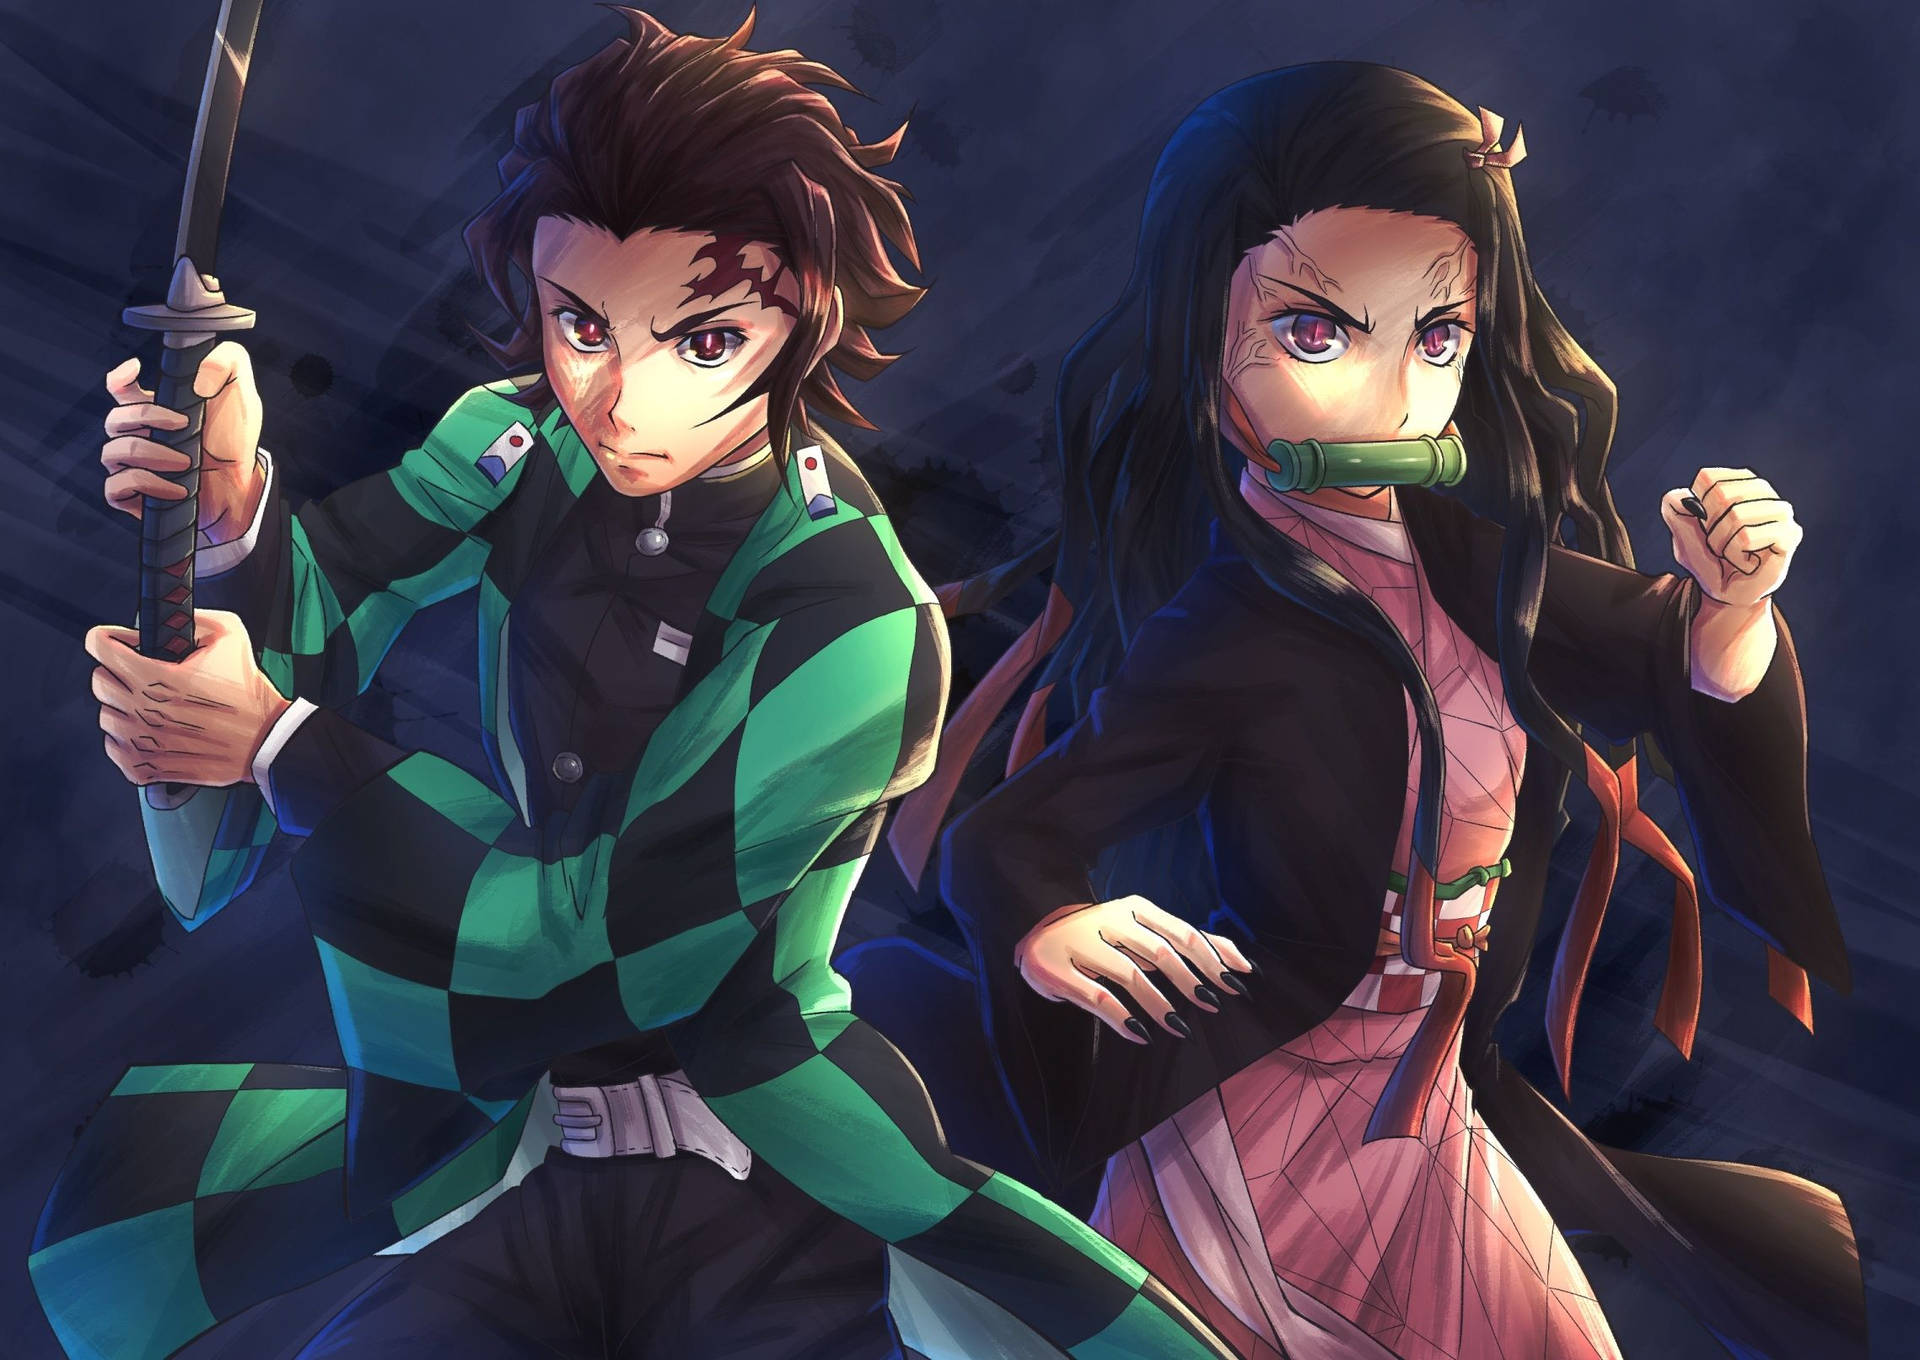 Nezuko Kamado, the Demon Slayer, teams up with her brother Tanjiro to save their family. Wallpaper